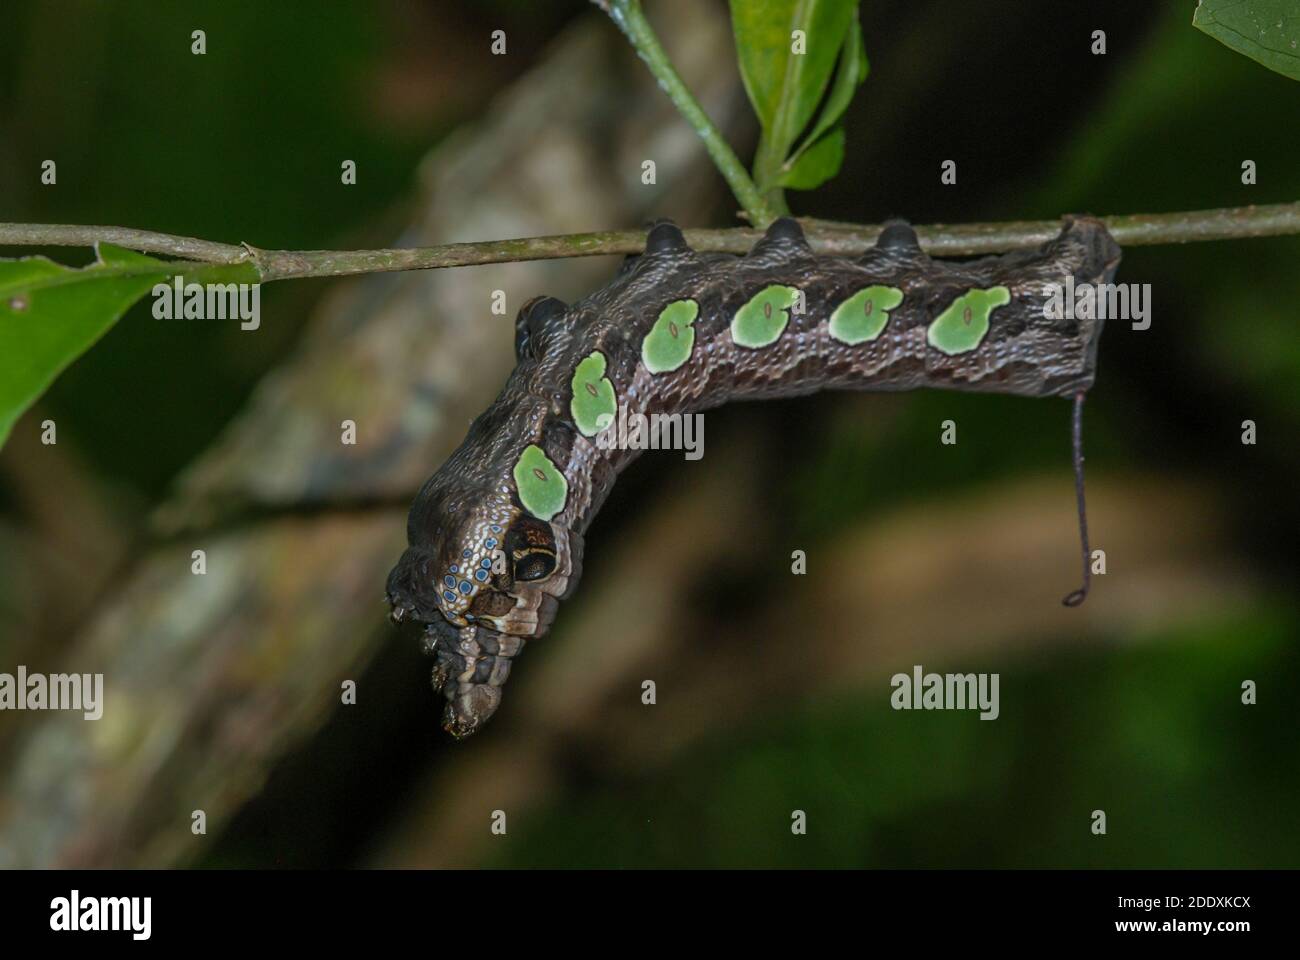 The caterpillar of the gaudy sphinx moth (Eumorpha labruscae) mimics a snake to protect itself from predators. Stock Photo